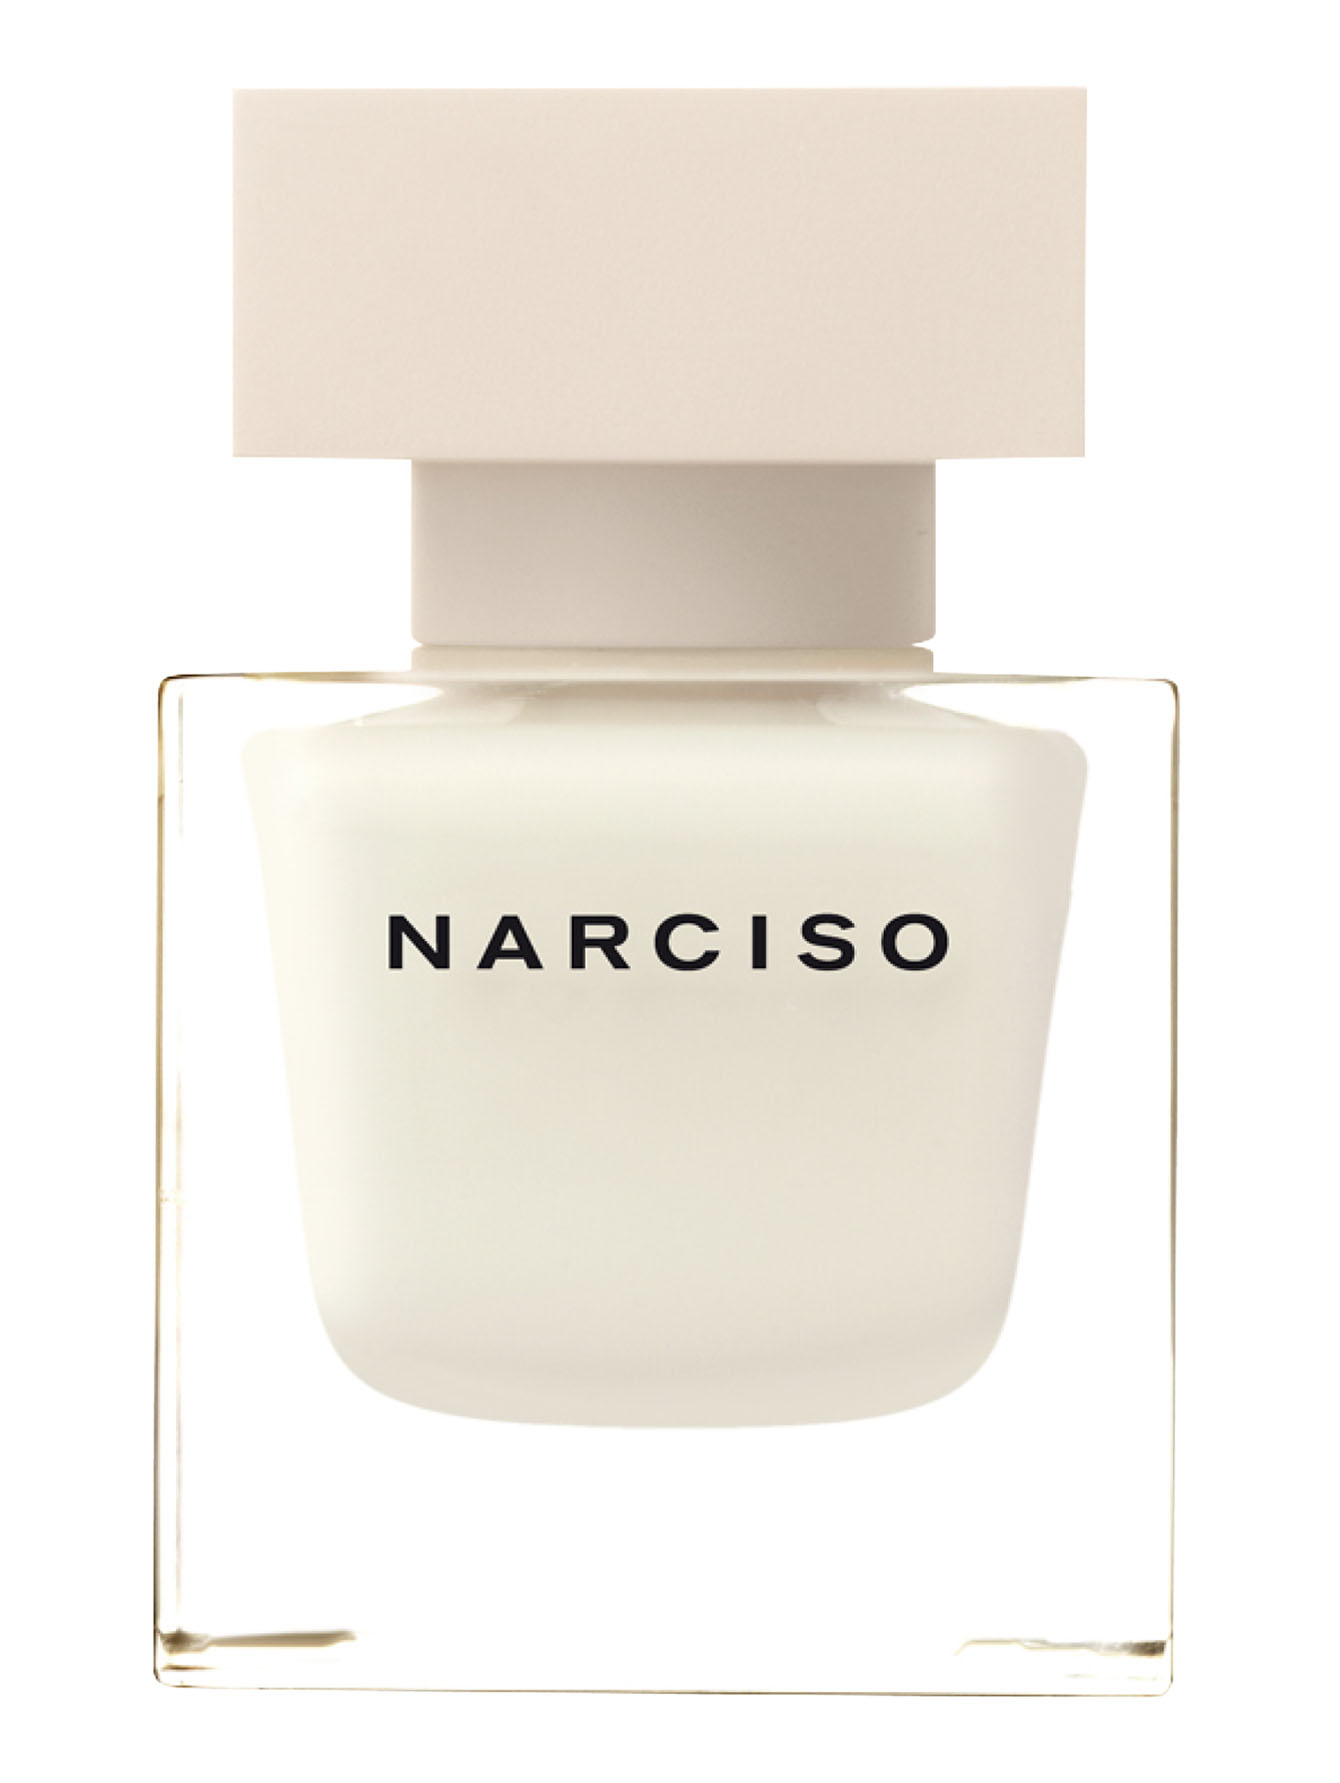 Аромат narciso rodriguez. Narciso Rodriguez Narciso EDP 90ml. Narciso Rodriguez Narciso Eau de Parfum 90 ml. Narciso Rodriguez Narciso Ambree EDP 90 мл. Парфюмерная вода Narciso Rodriguez Narciso 90ml (жен).